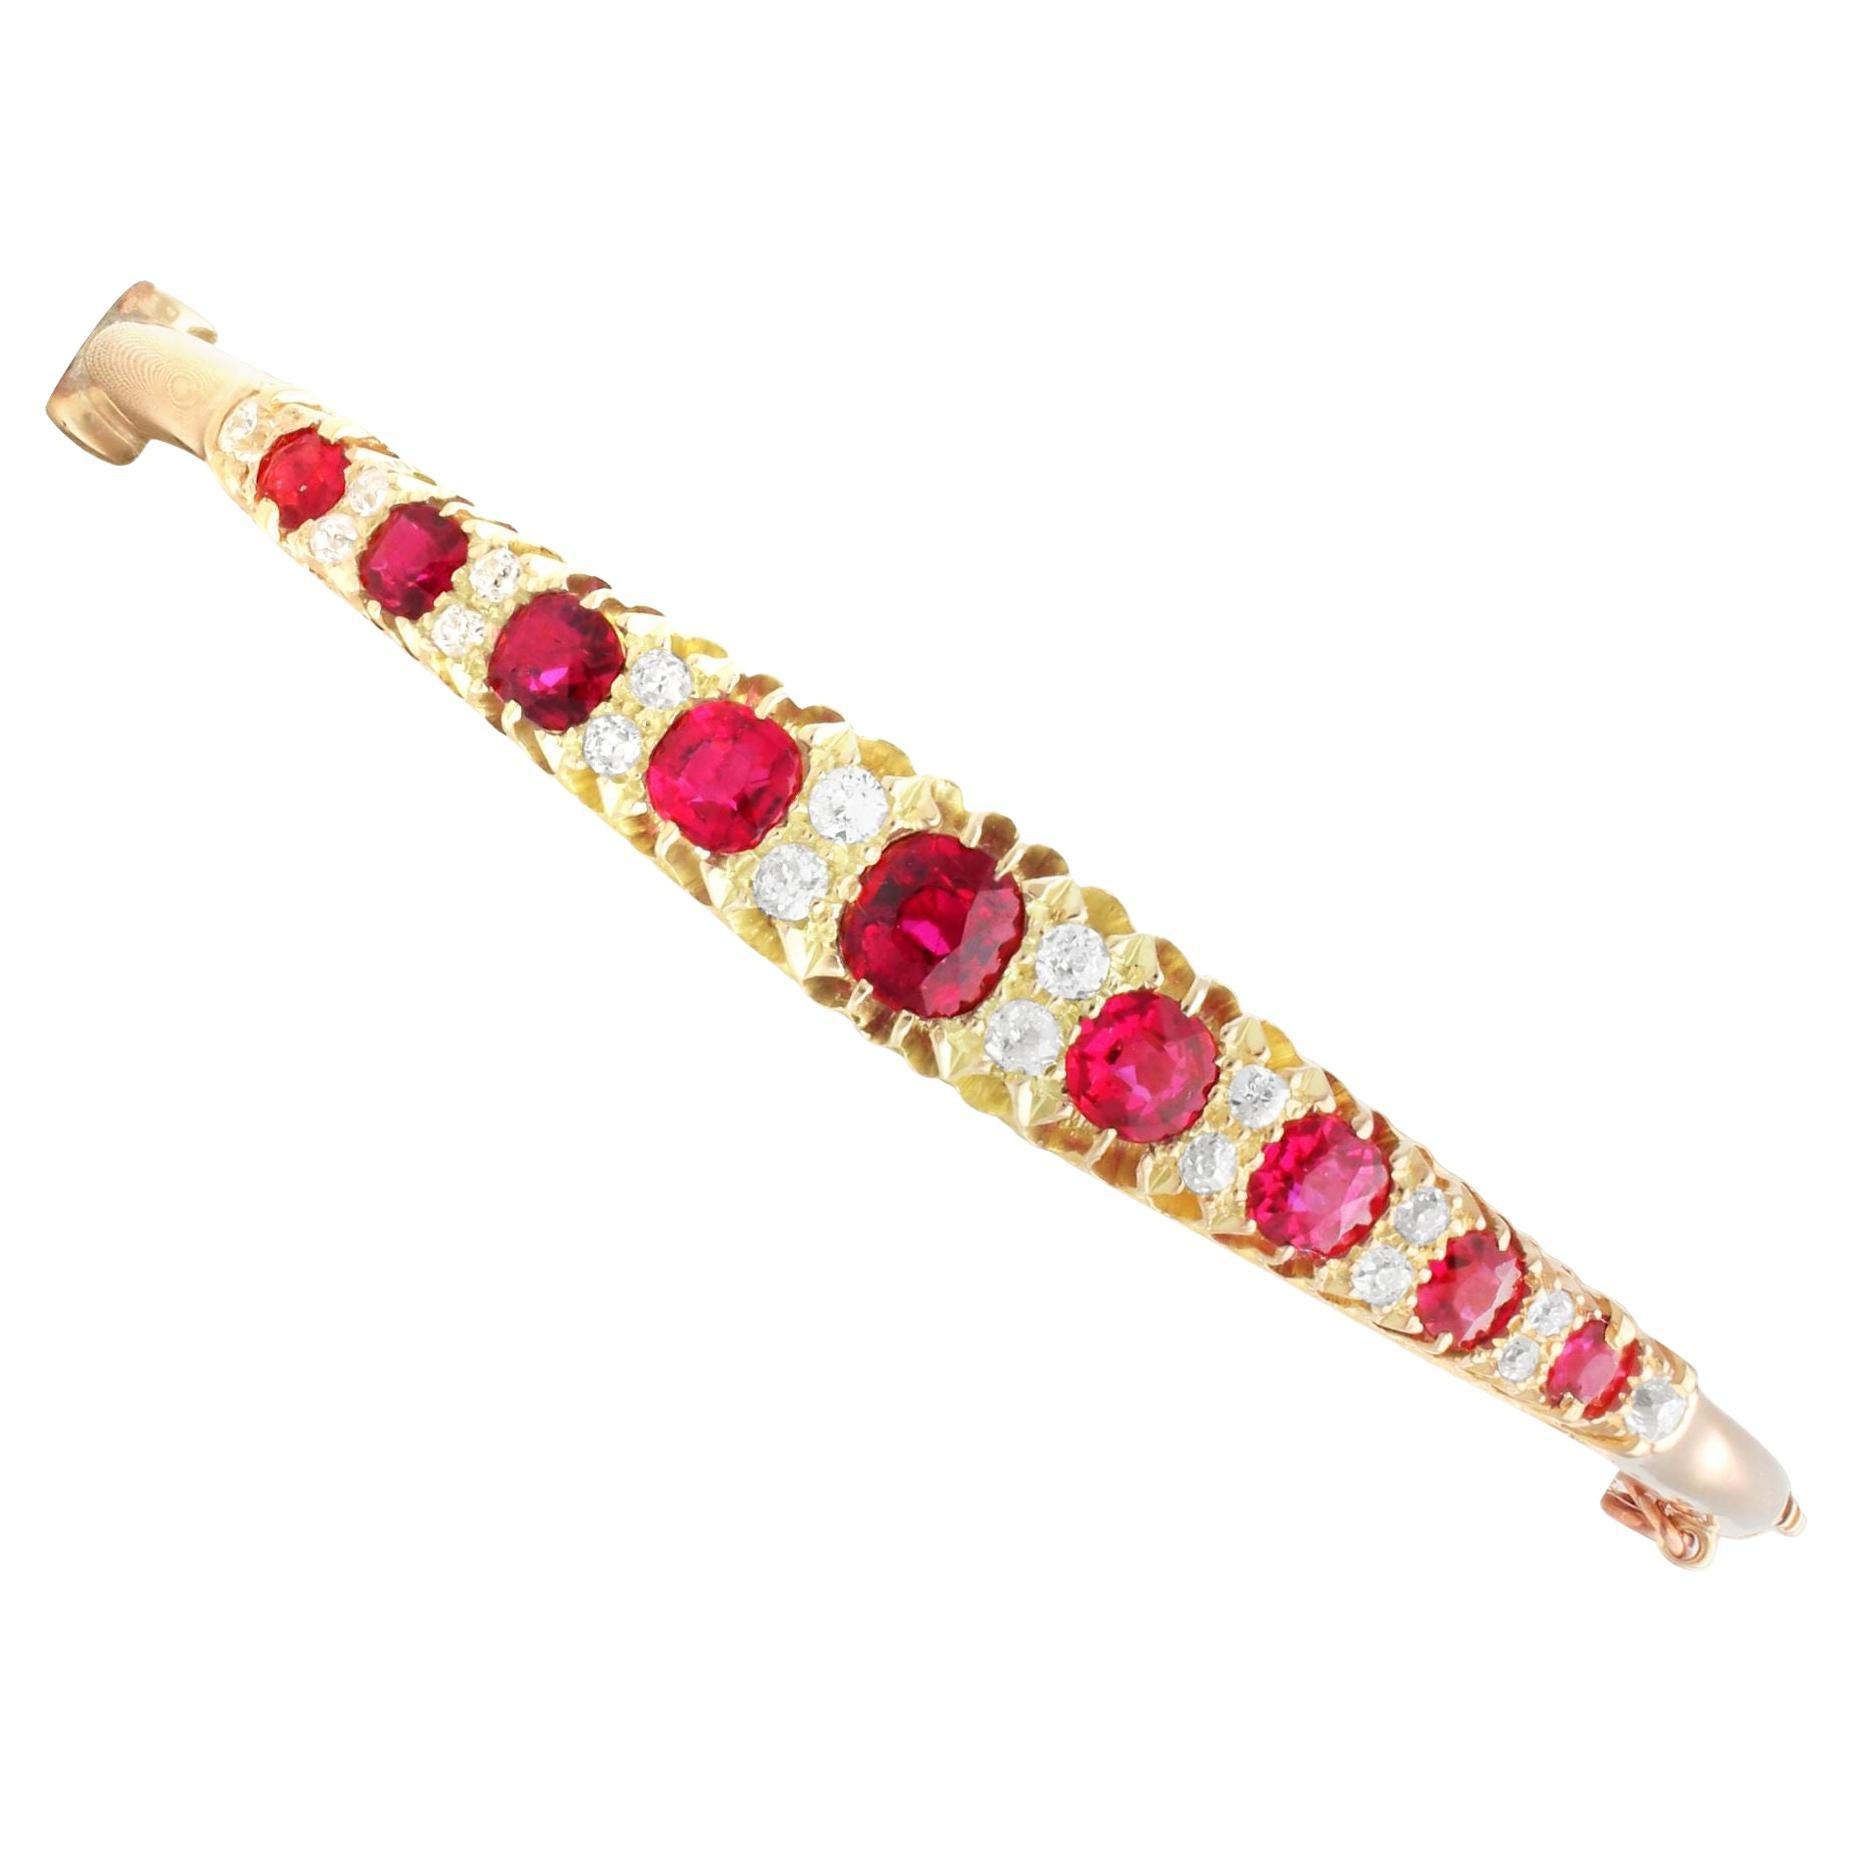 Antique 3.06 Ct Thai Ruby and 0.47 Ct Diamond 15 Ct Yellow Gold Bangle